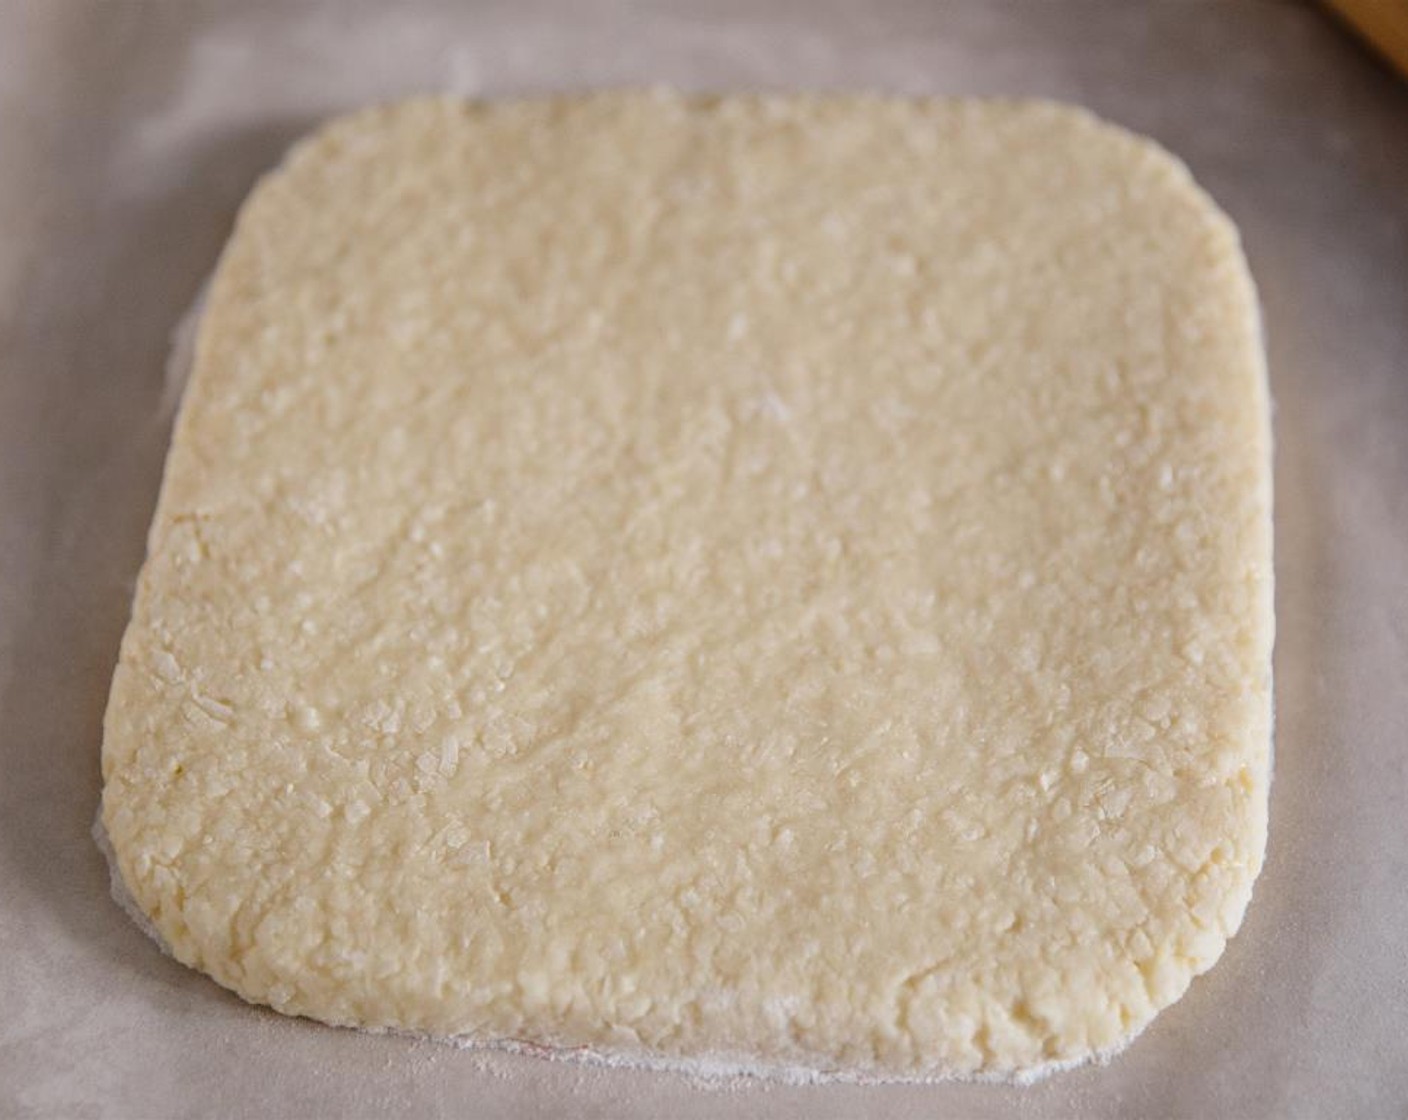 step 9 On a piece of baking paper, roll out and shape the white coconut ice layer into a square, about 3/4 inches thick